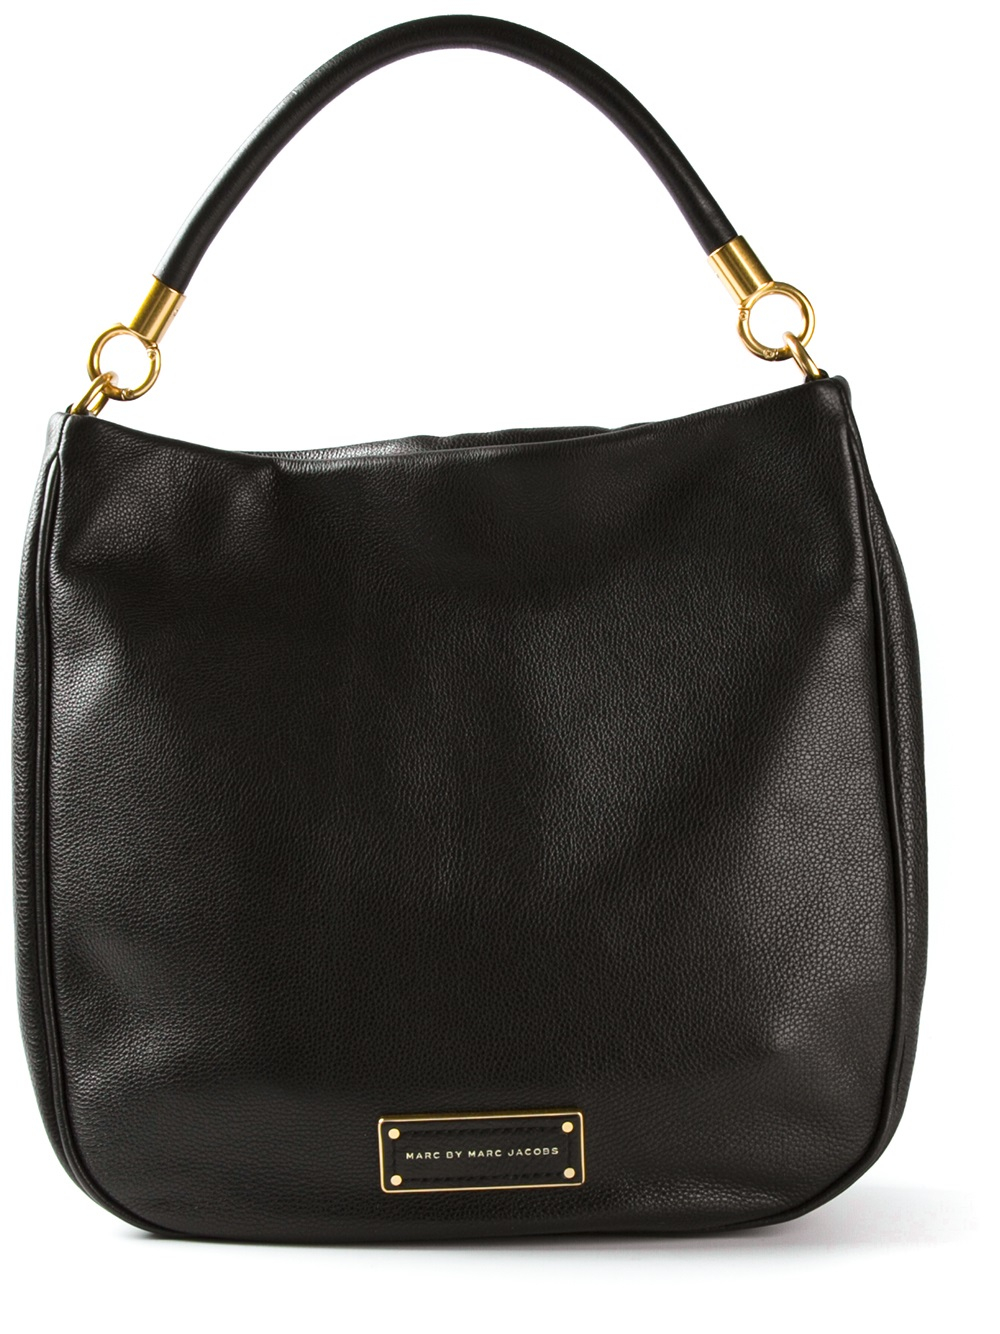 Marc By Marc Jacobs &#39;Too Hot To Handle&#39; Hobo Bag in Black - Lyst